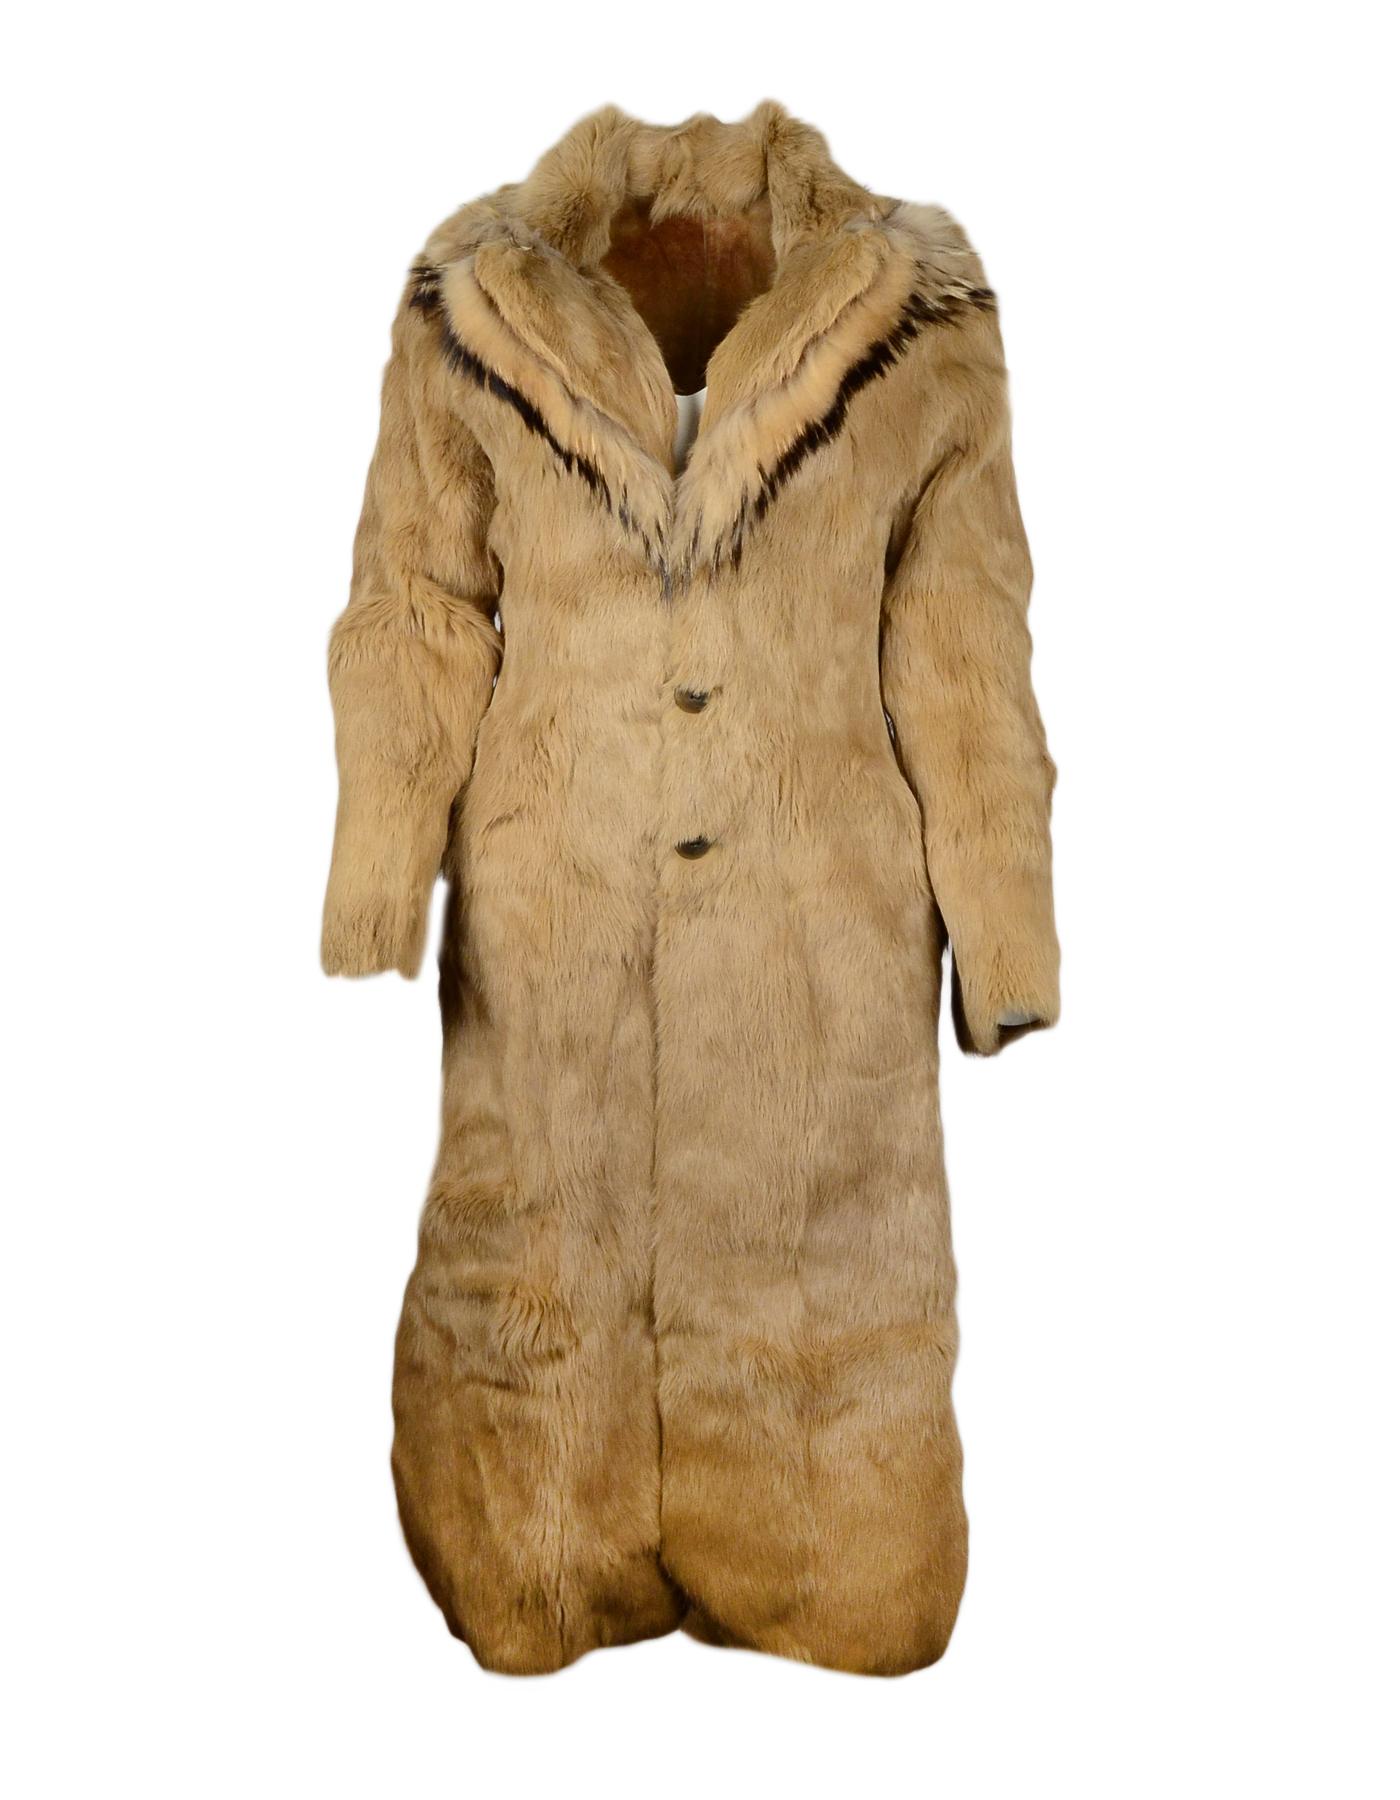 Baya Paris Tan Reversible Shearling/Fur Coat W/ Fur Collar & Belt Sz S

Color: Tan/brown
Materials: Shearling/fur
Lining: Reversible 
Opening/Closure: Button front and belt
Overall Condition: Very good pre-owned condition with exception of rip to